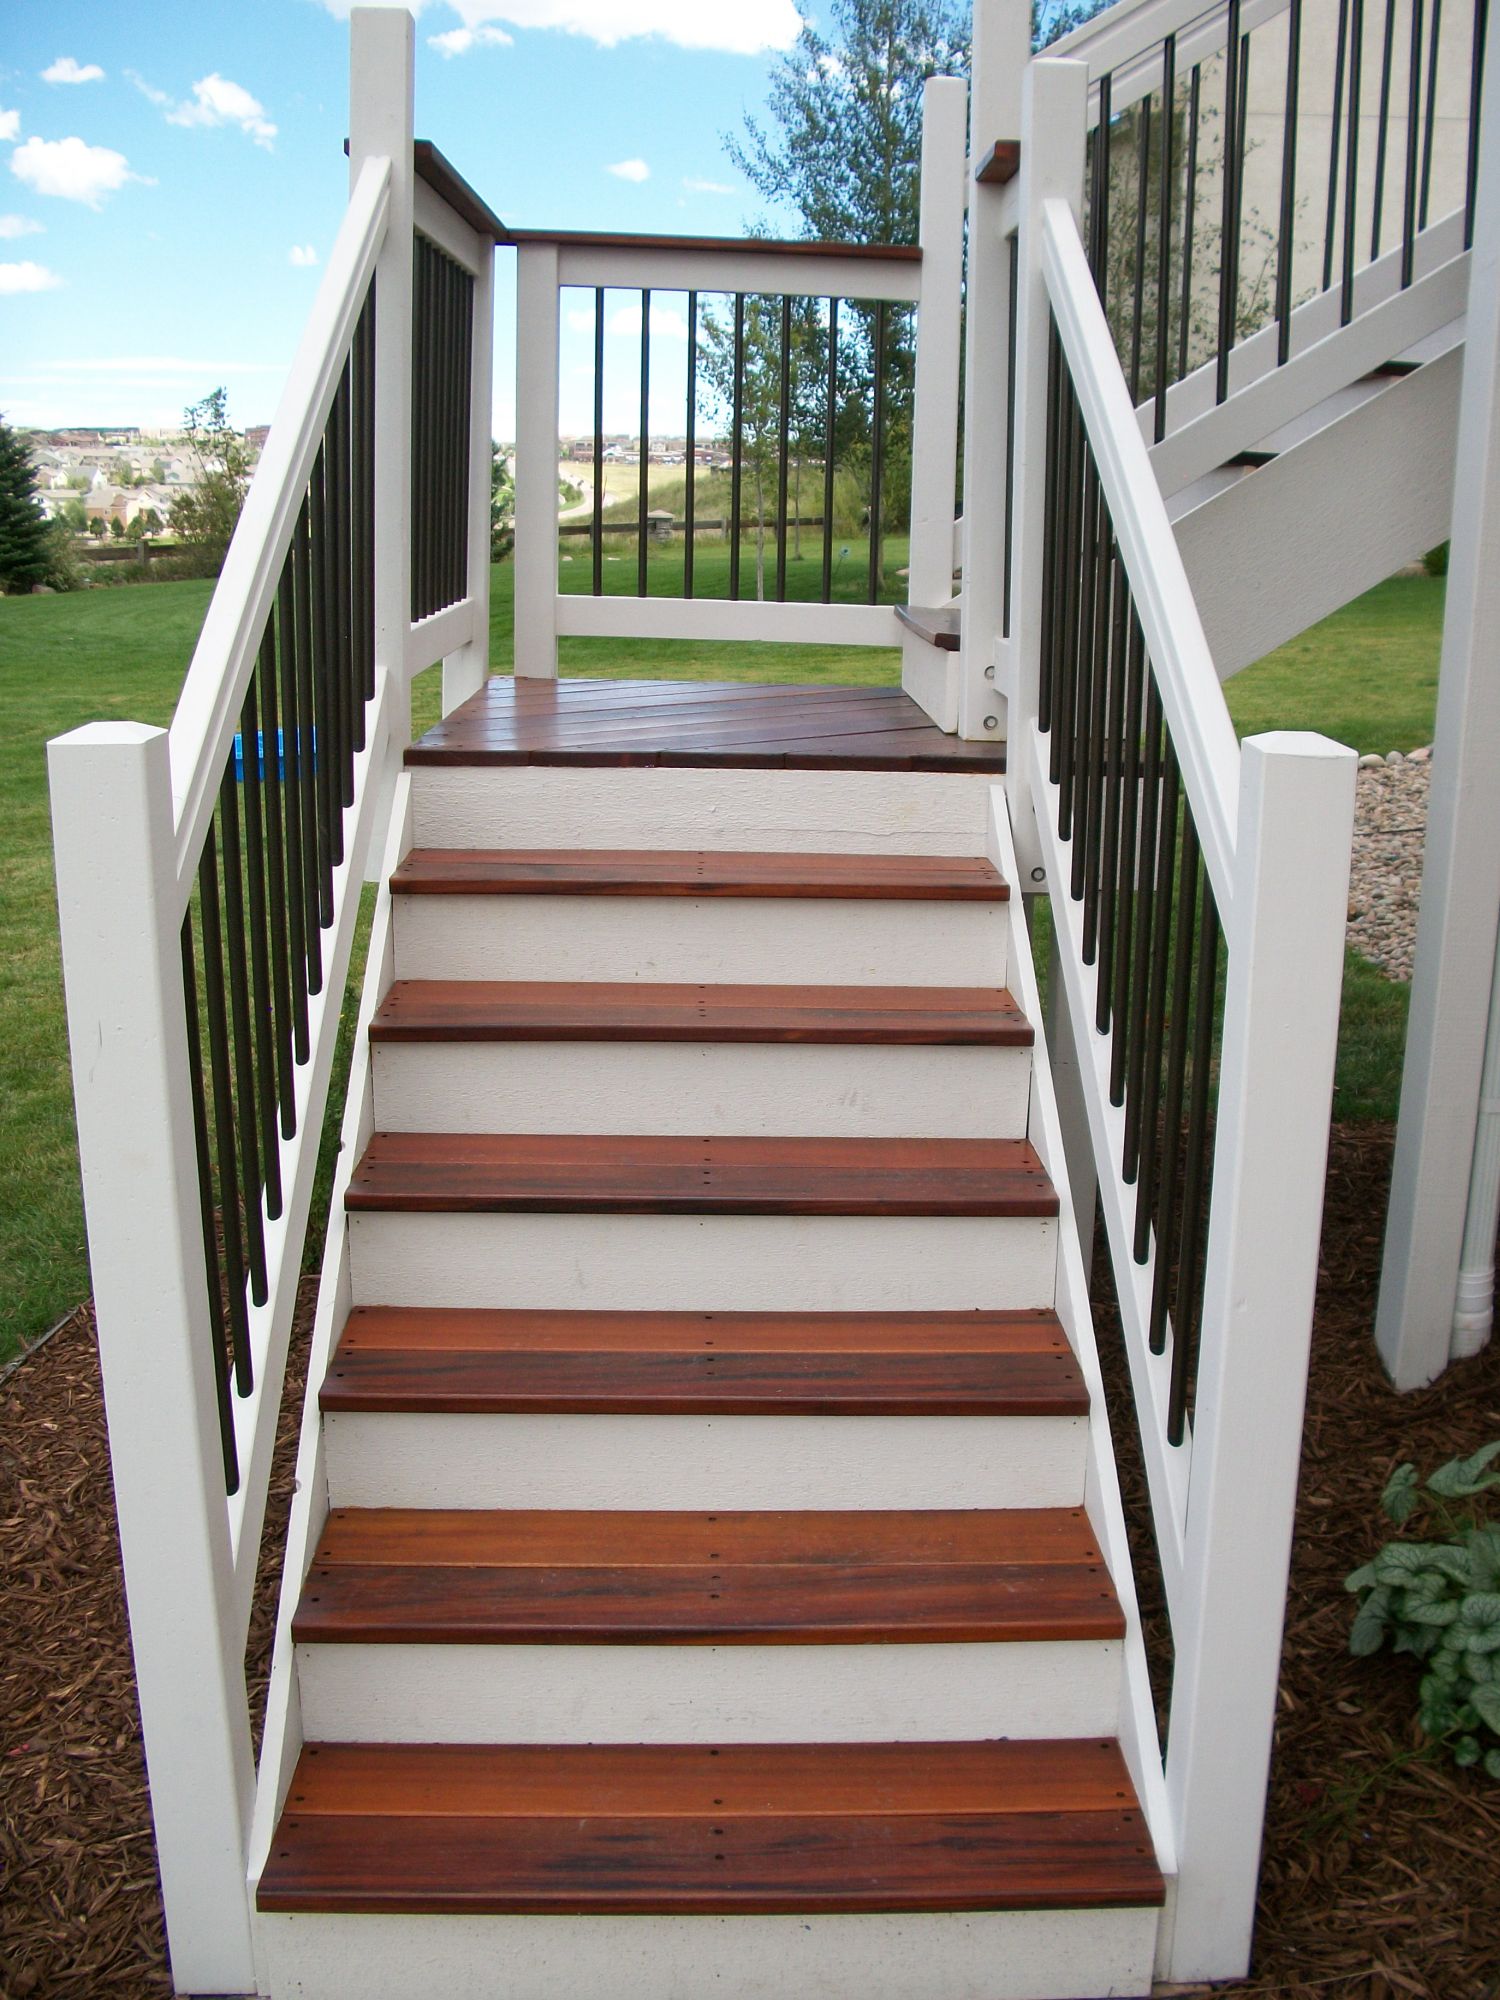 Deck stairs with hardwood treads and a 90-degree turn landing